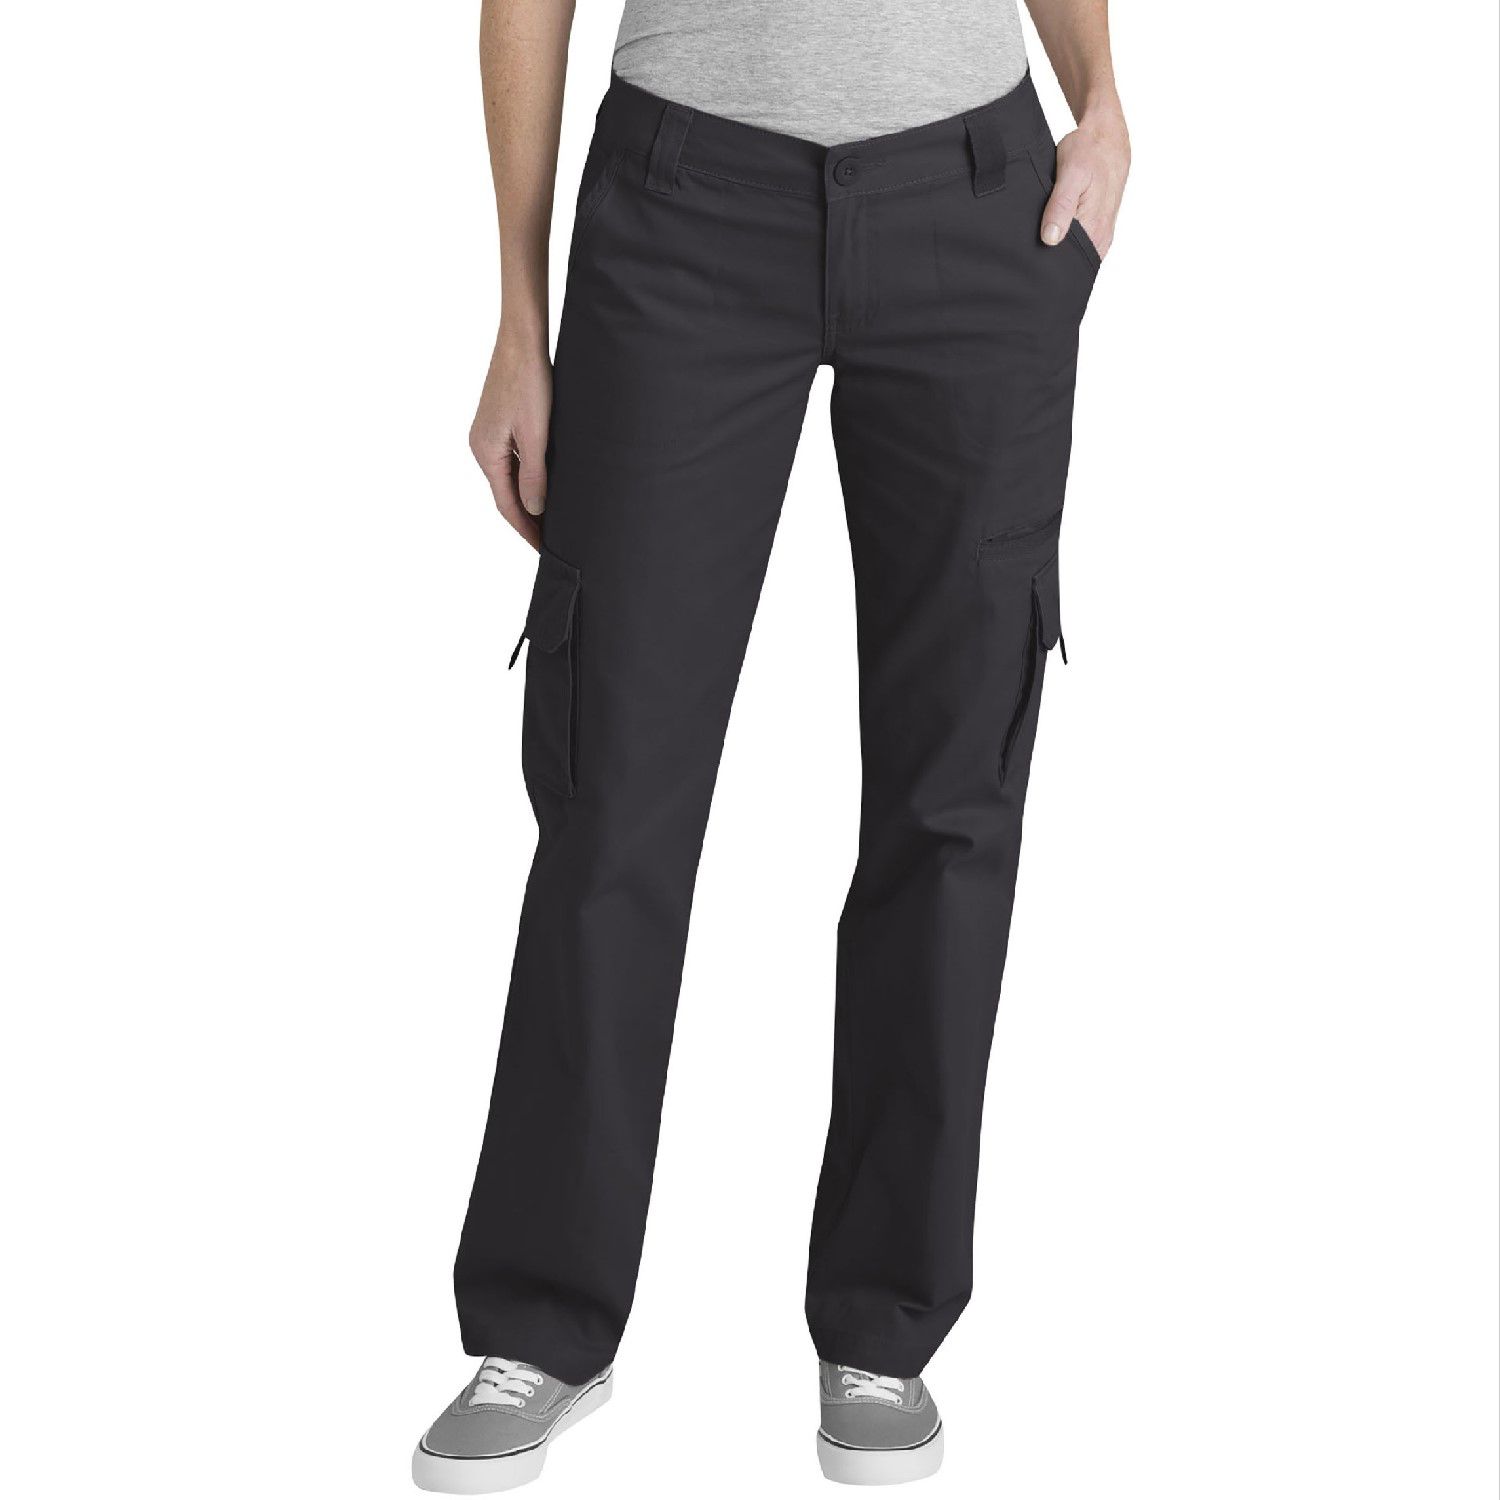 women's relaxed fit cargo pants